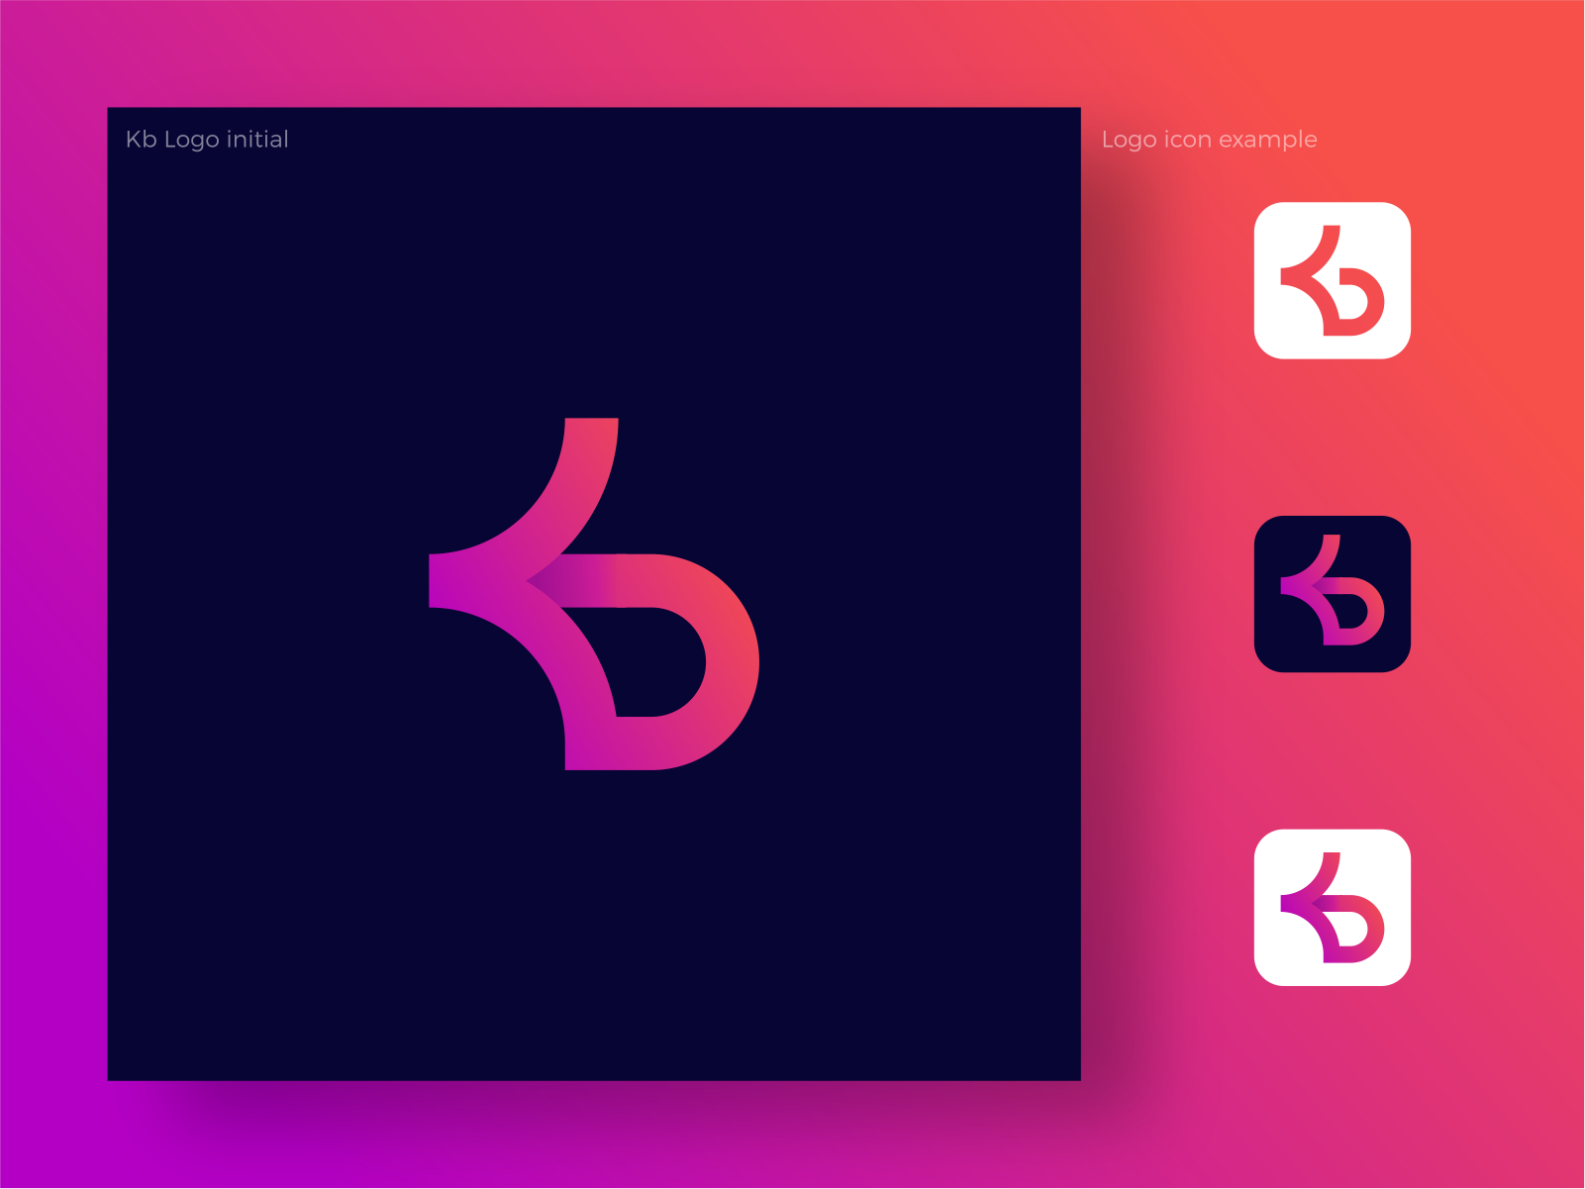 Kb Logo by Vck on Dribbble